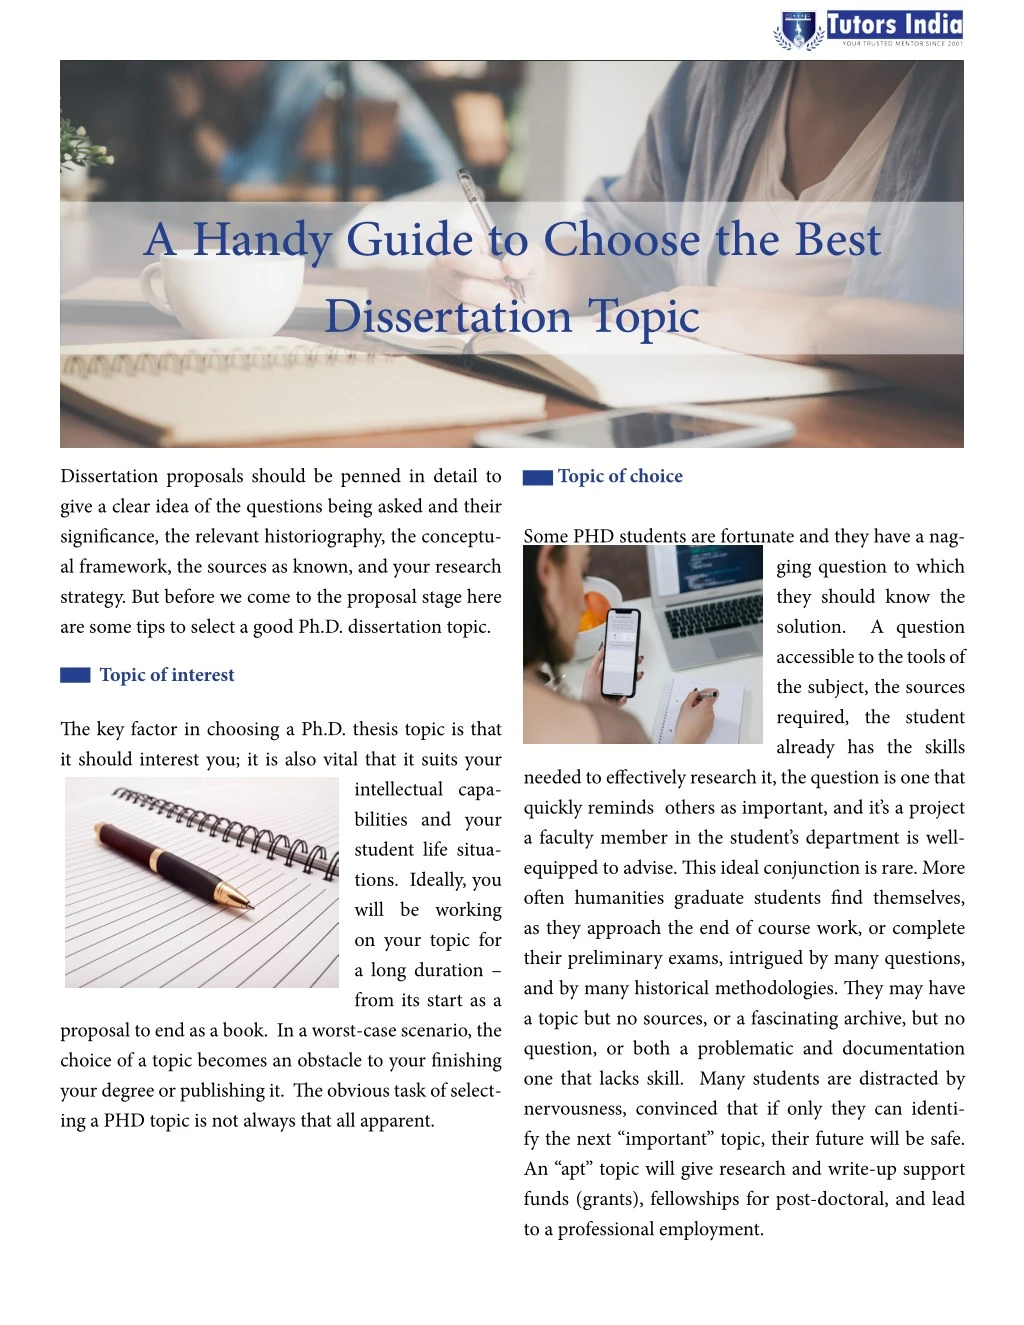 a handy guide to choose the best dissertation